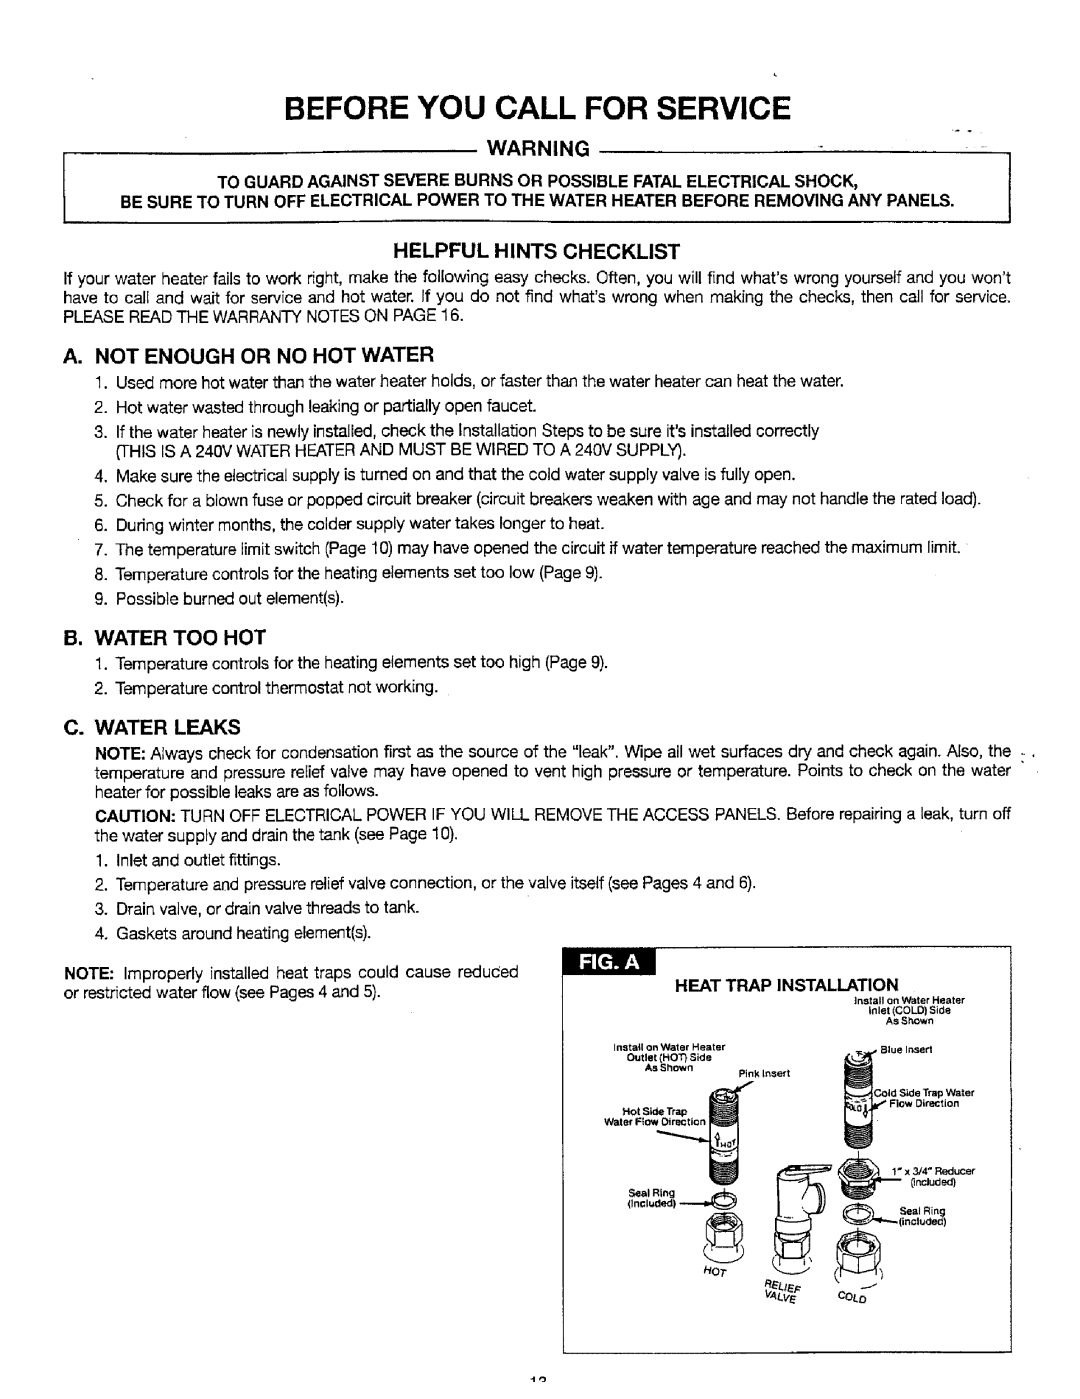 Sears 449.32051 Before You Call For Service, Helpful Hints Checklist, A. Not Enough Or No Hot Water, B. Water Too Hot 